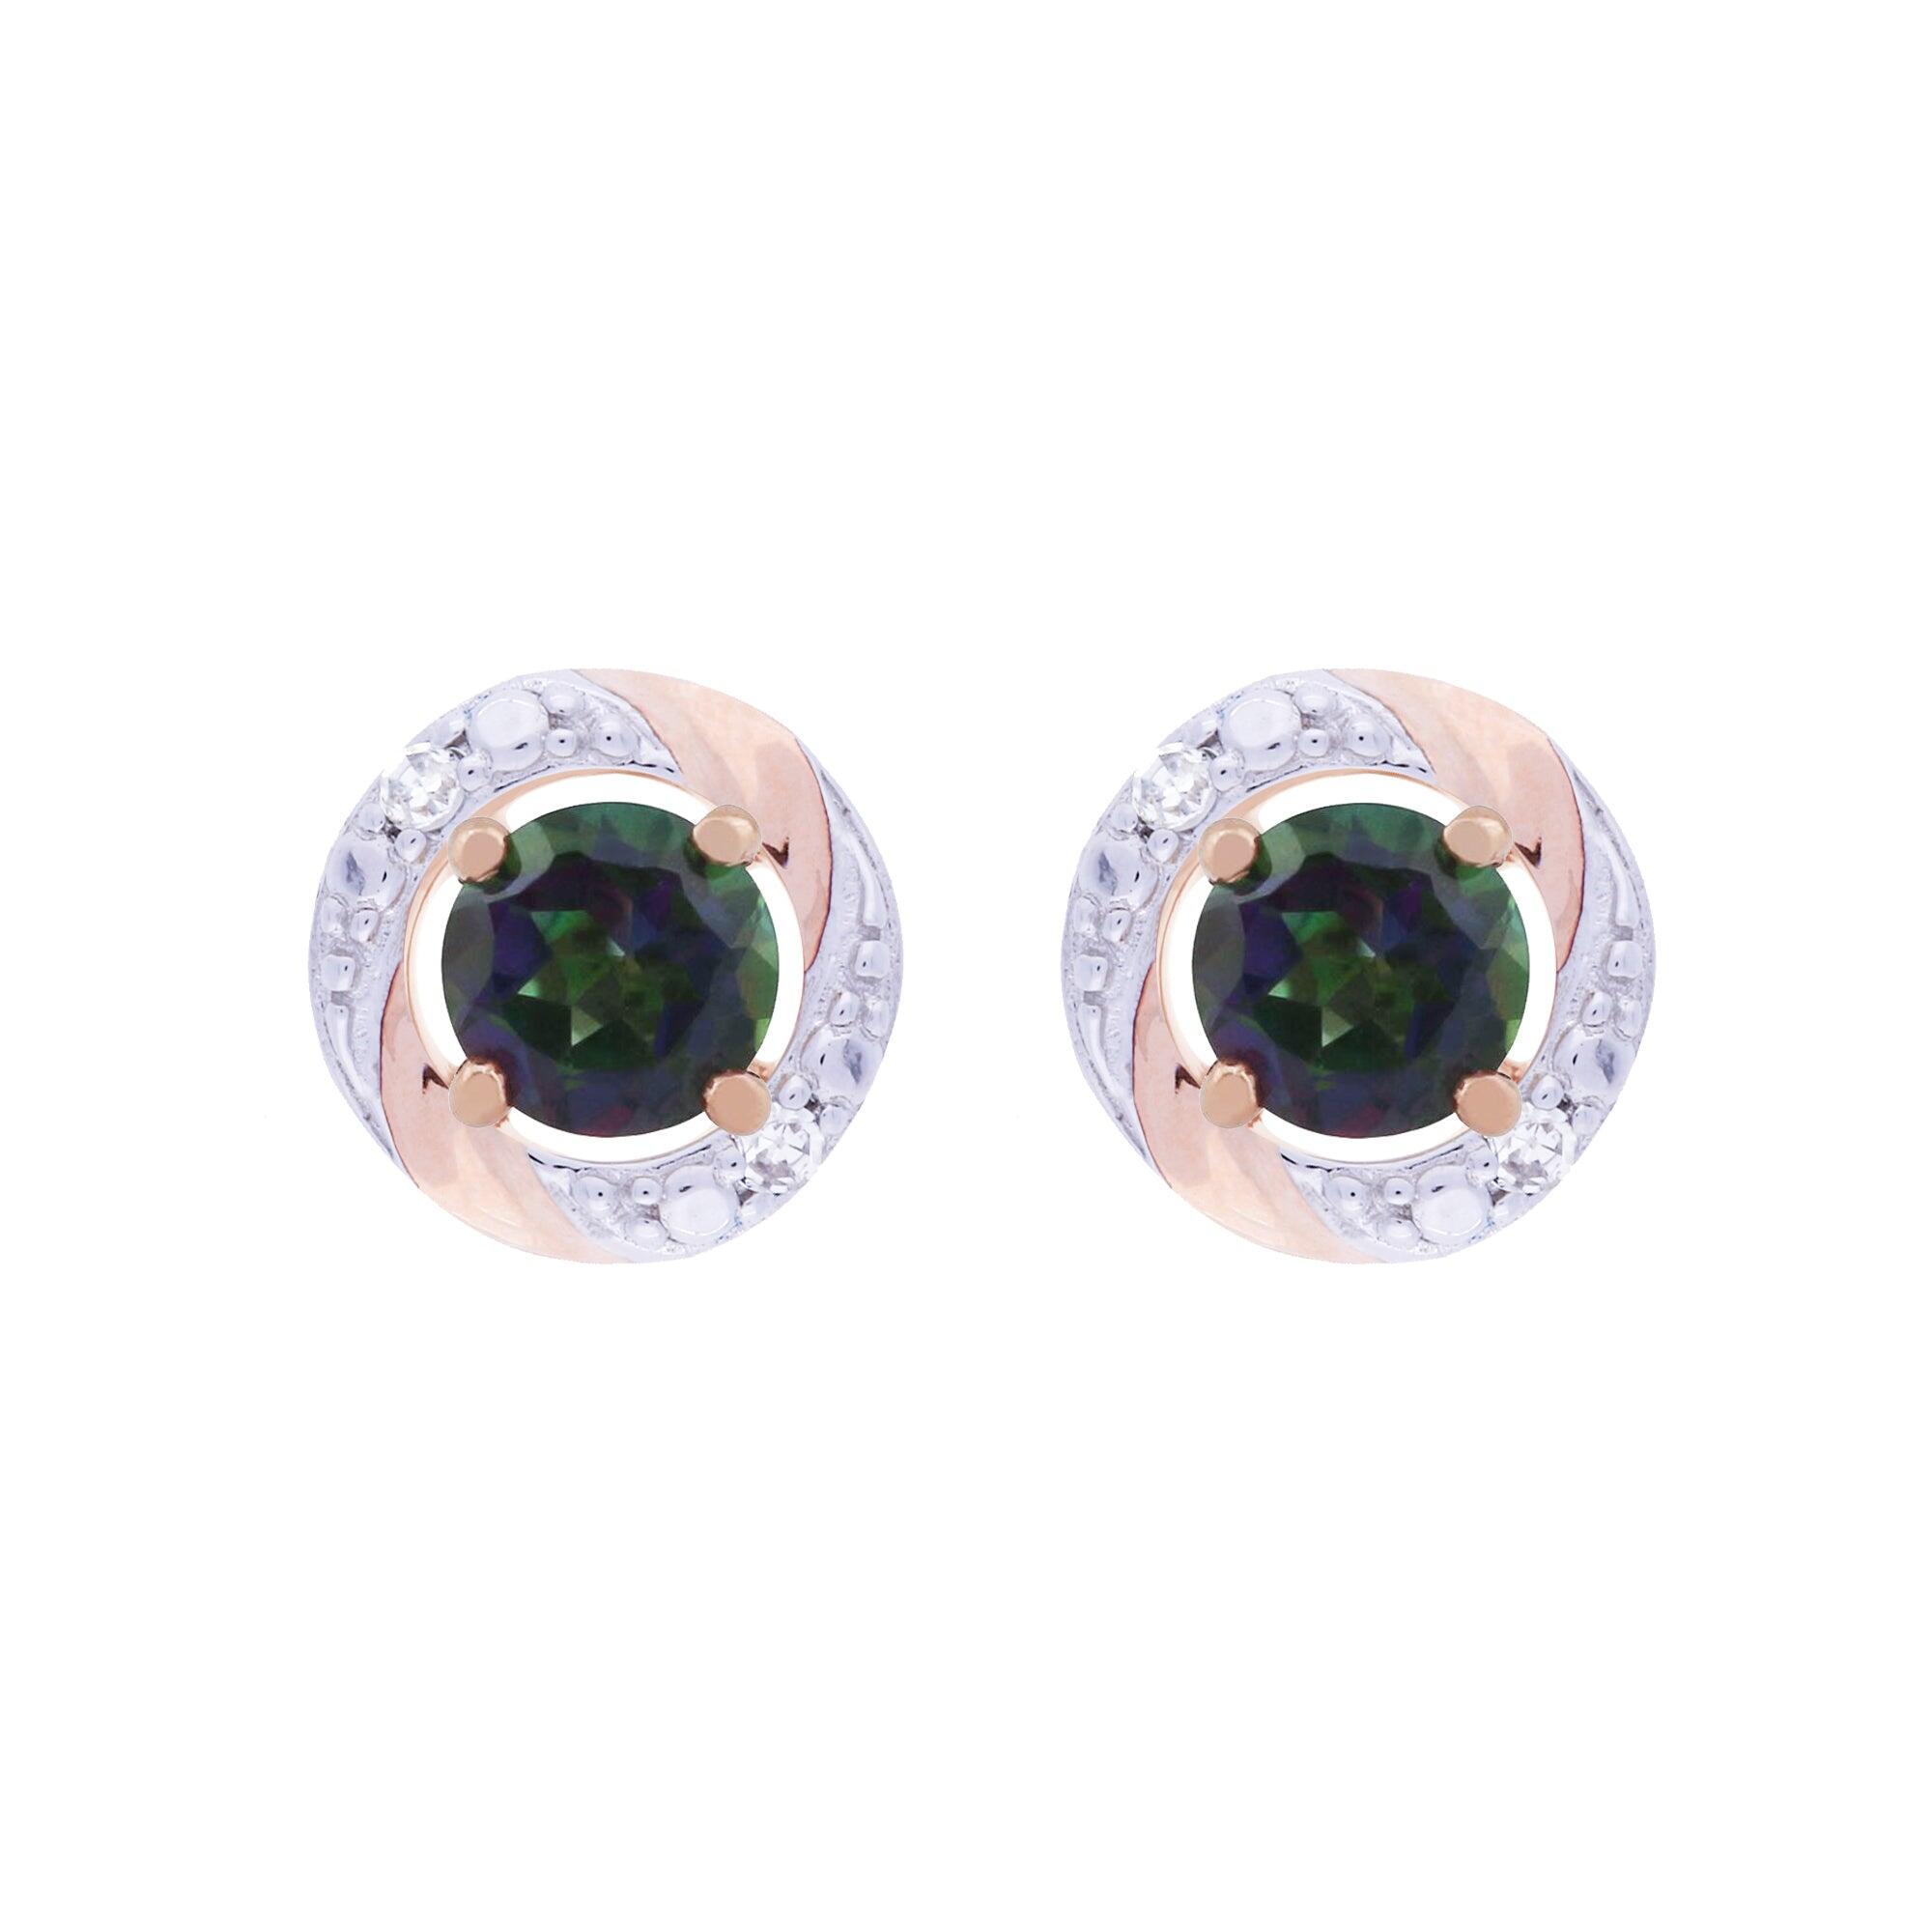 Classic Round Mystic Topaz Stud Earrings with Detachable Diamond Round Earrings Jacket Set in 9ct Rose Gold